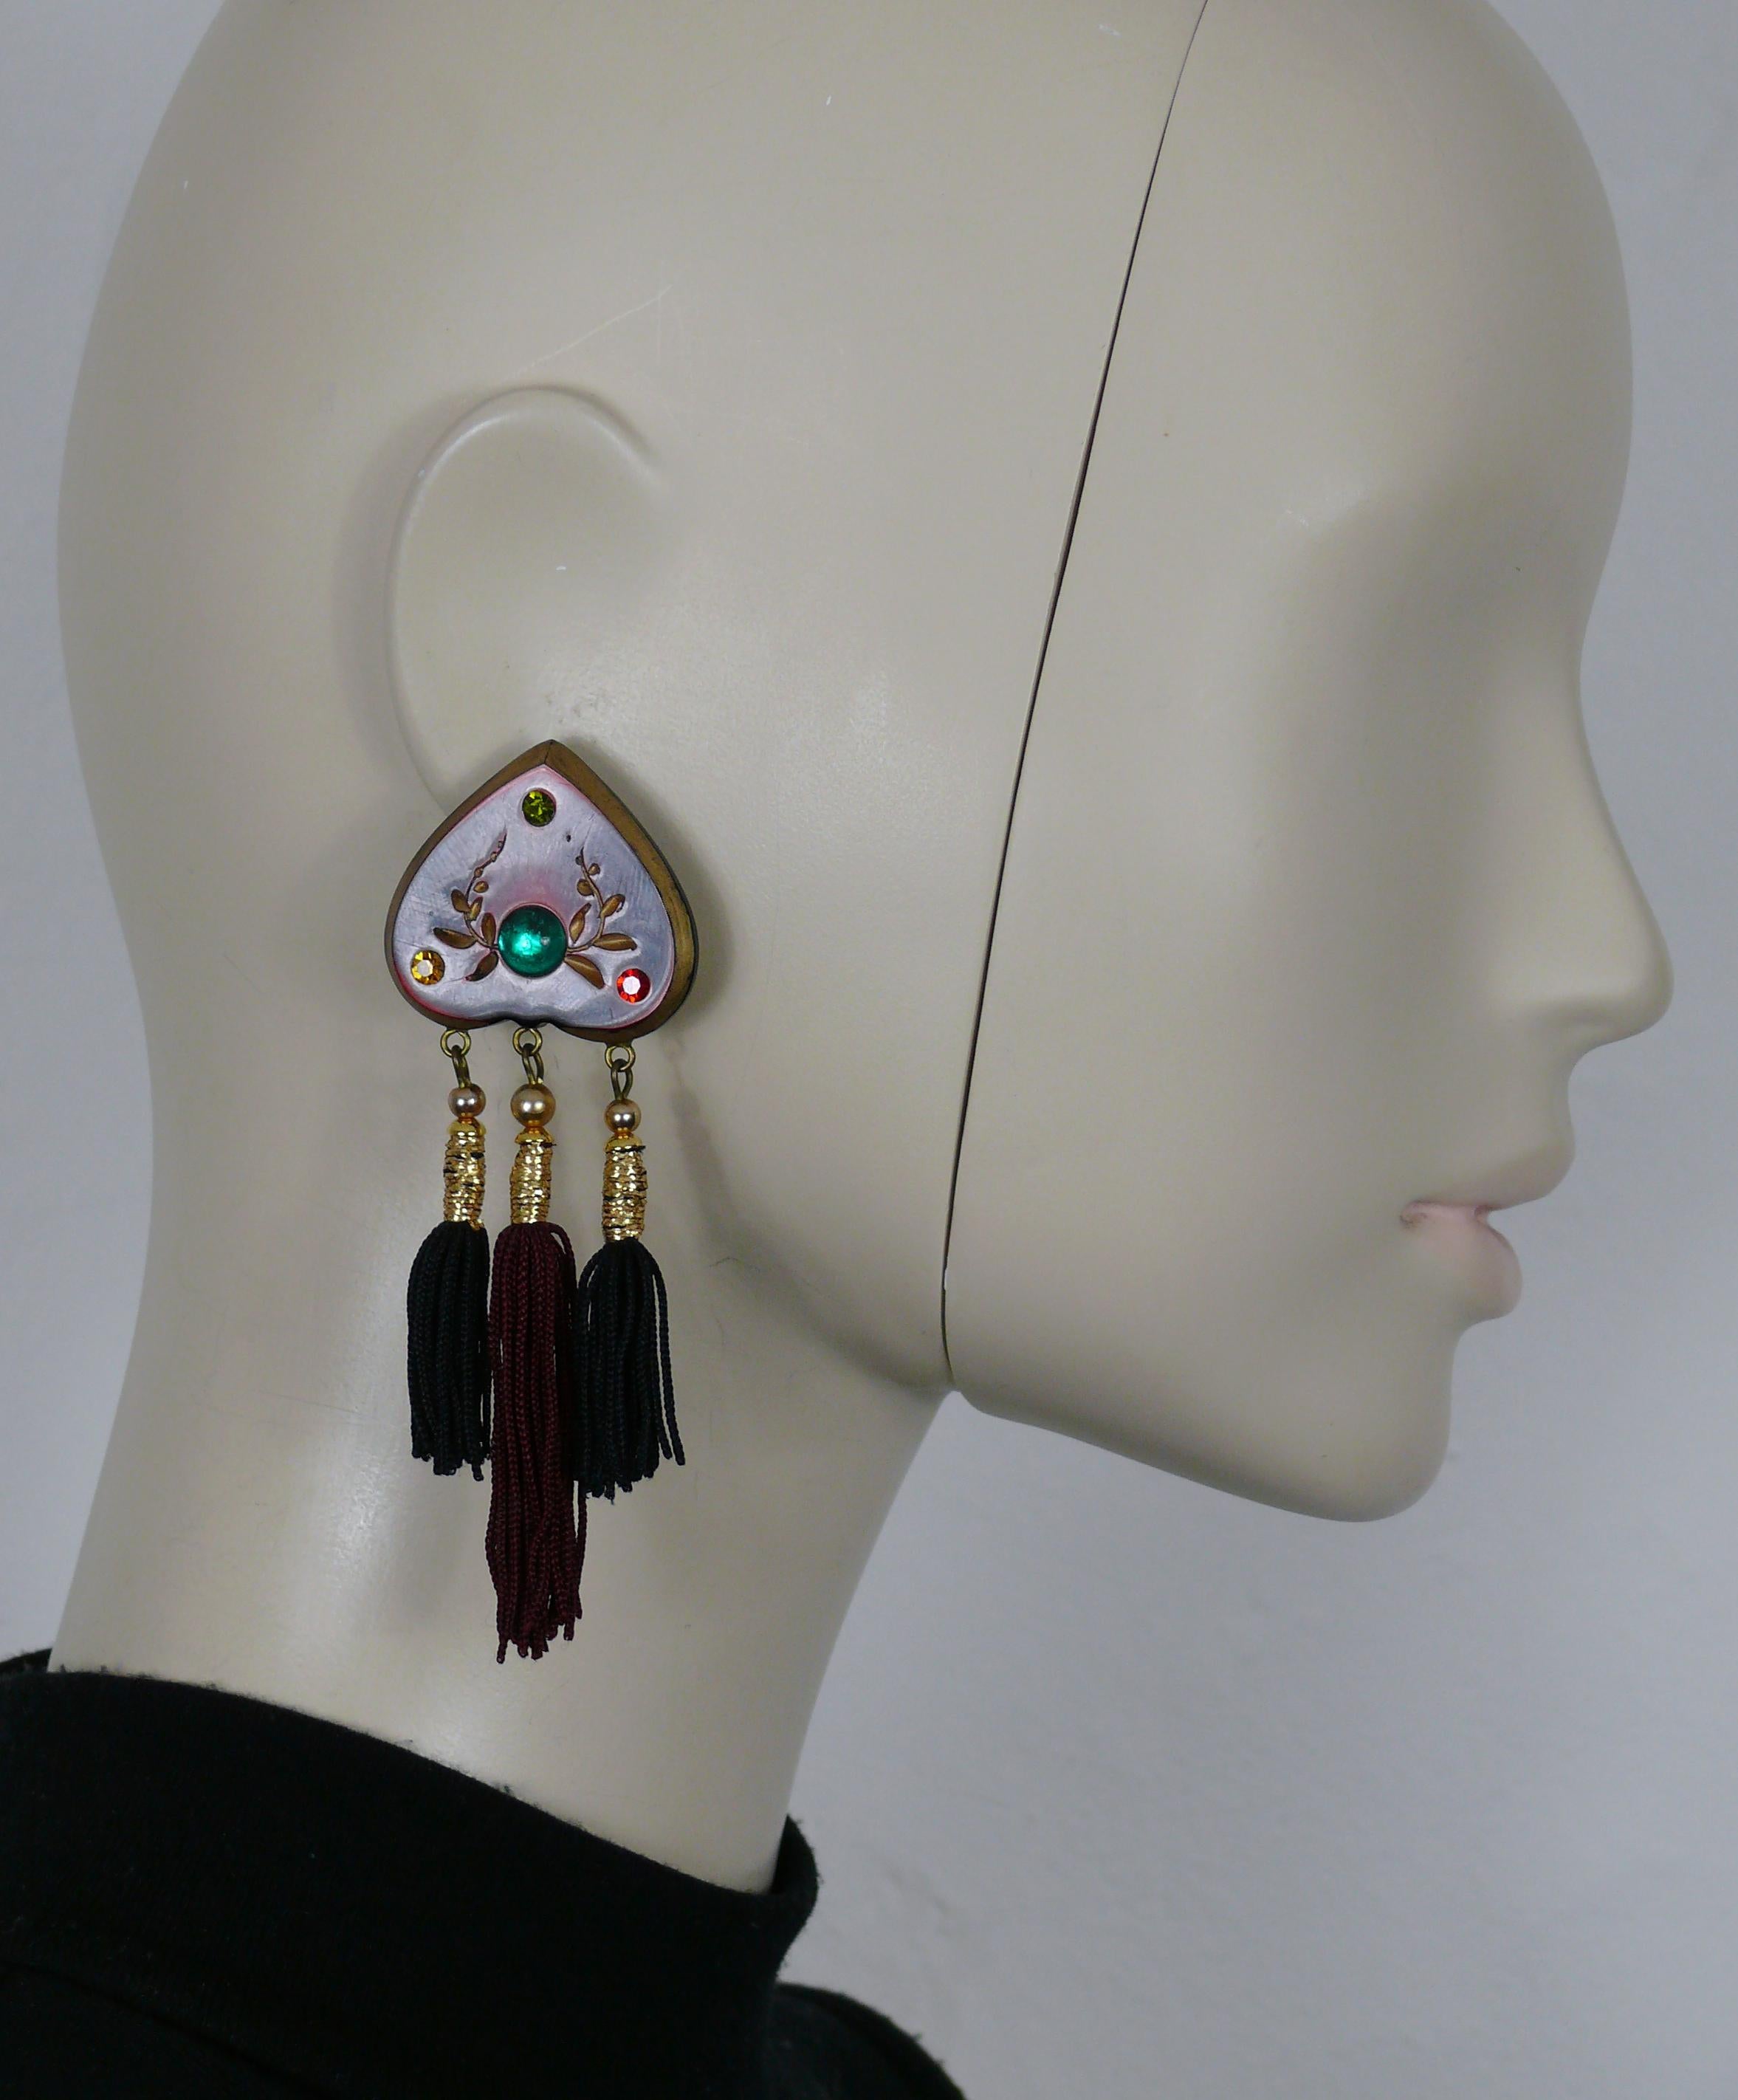 JEAN LOUIS SCHERRER vintage Russian inspired dangling earrings (clip-on) featuring a resin heart embellished with multi colored crystals and a green resin cabochon, three tassels (two in black color, one in burgundy color).

Marked SCHERRER Paris